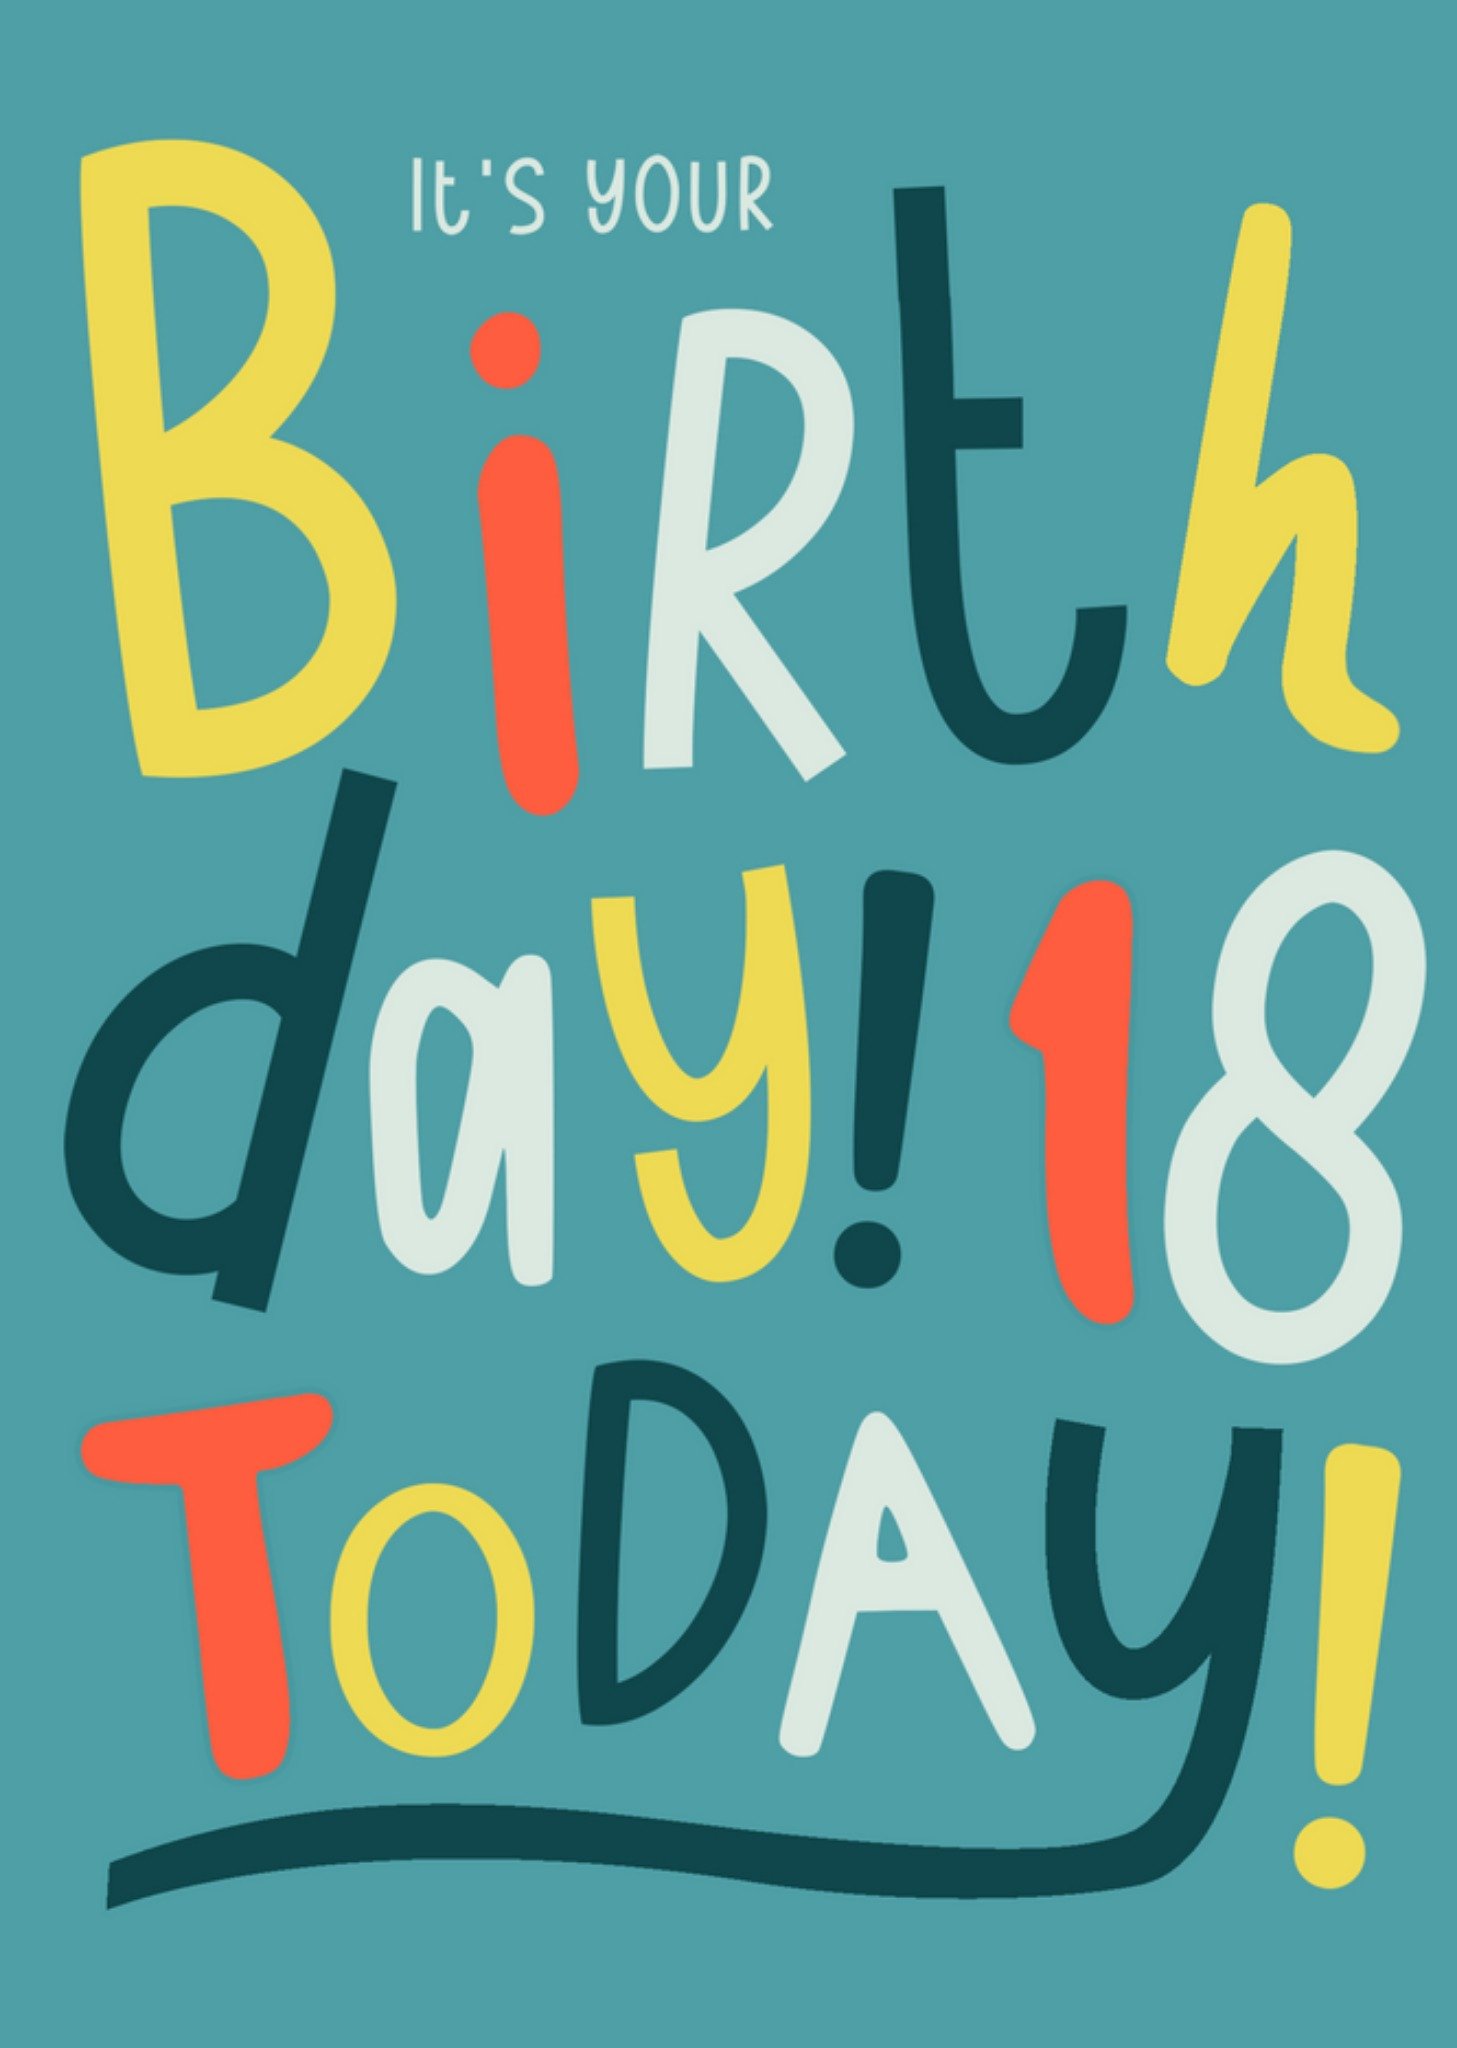 Moonpig Bold Its Your Birthday 18 Today Typographic Card Ecard